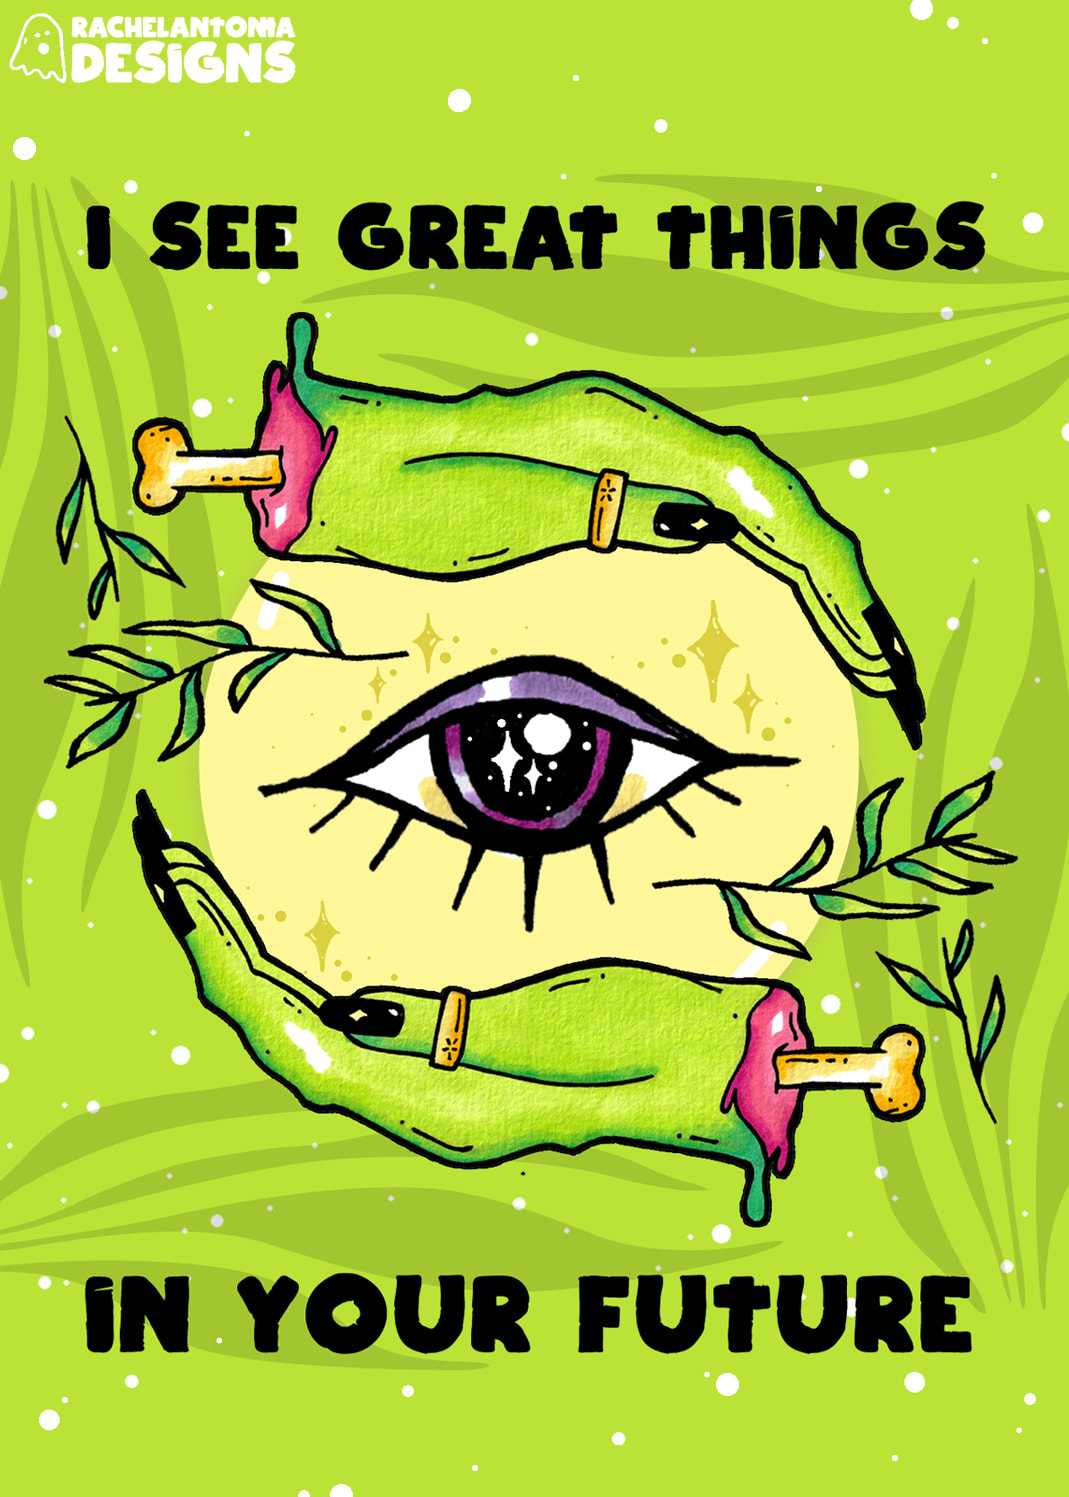 Card Design of an eye in the middle of two green zombie hands